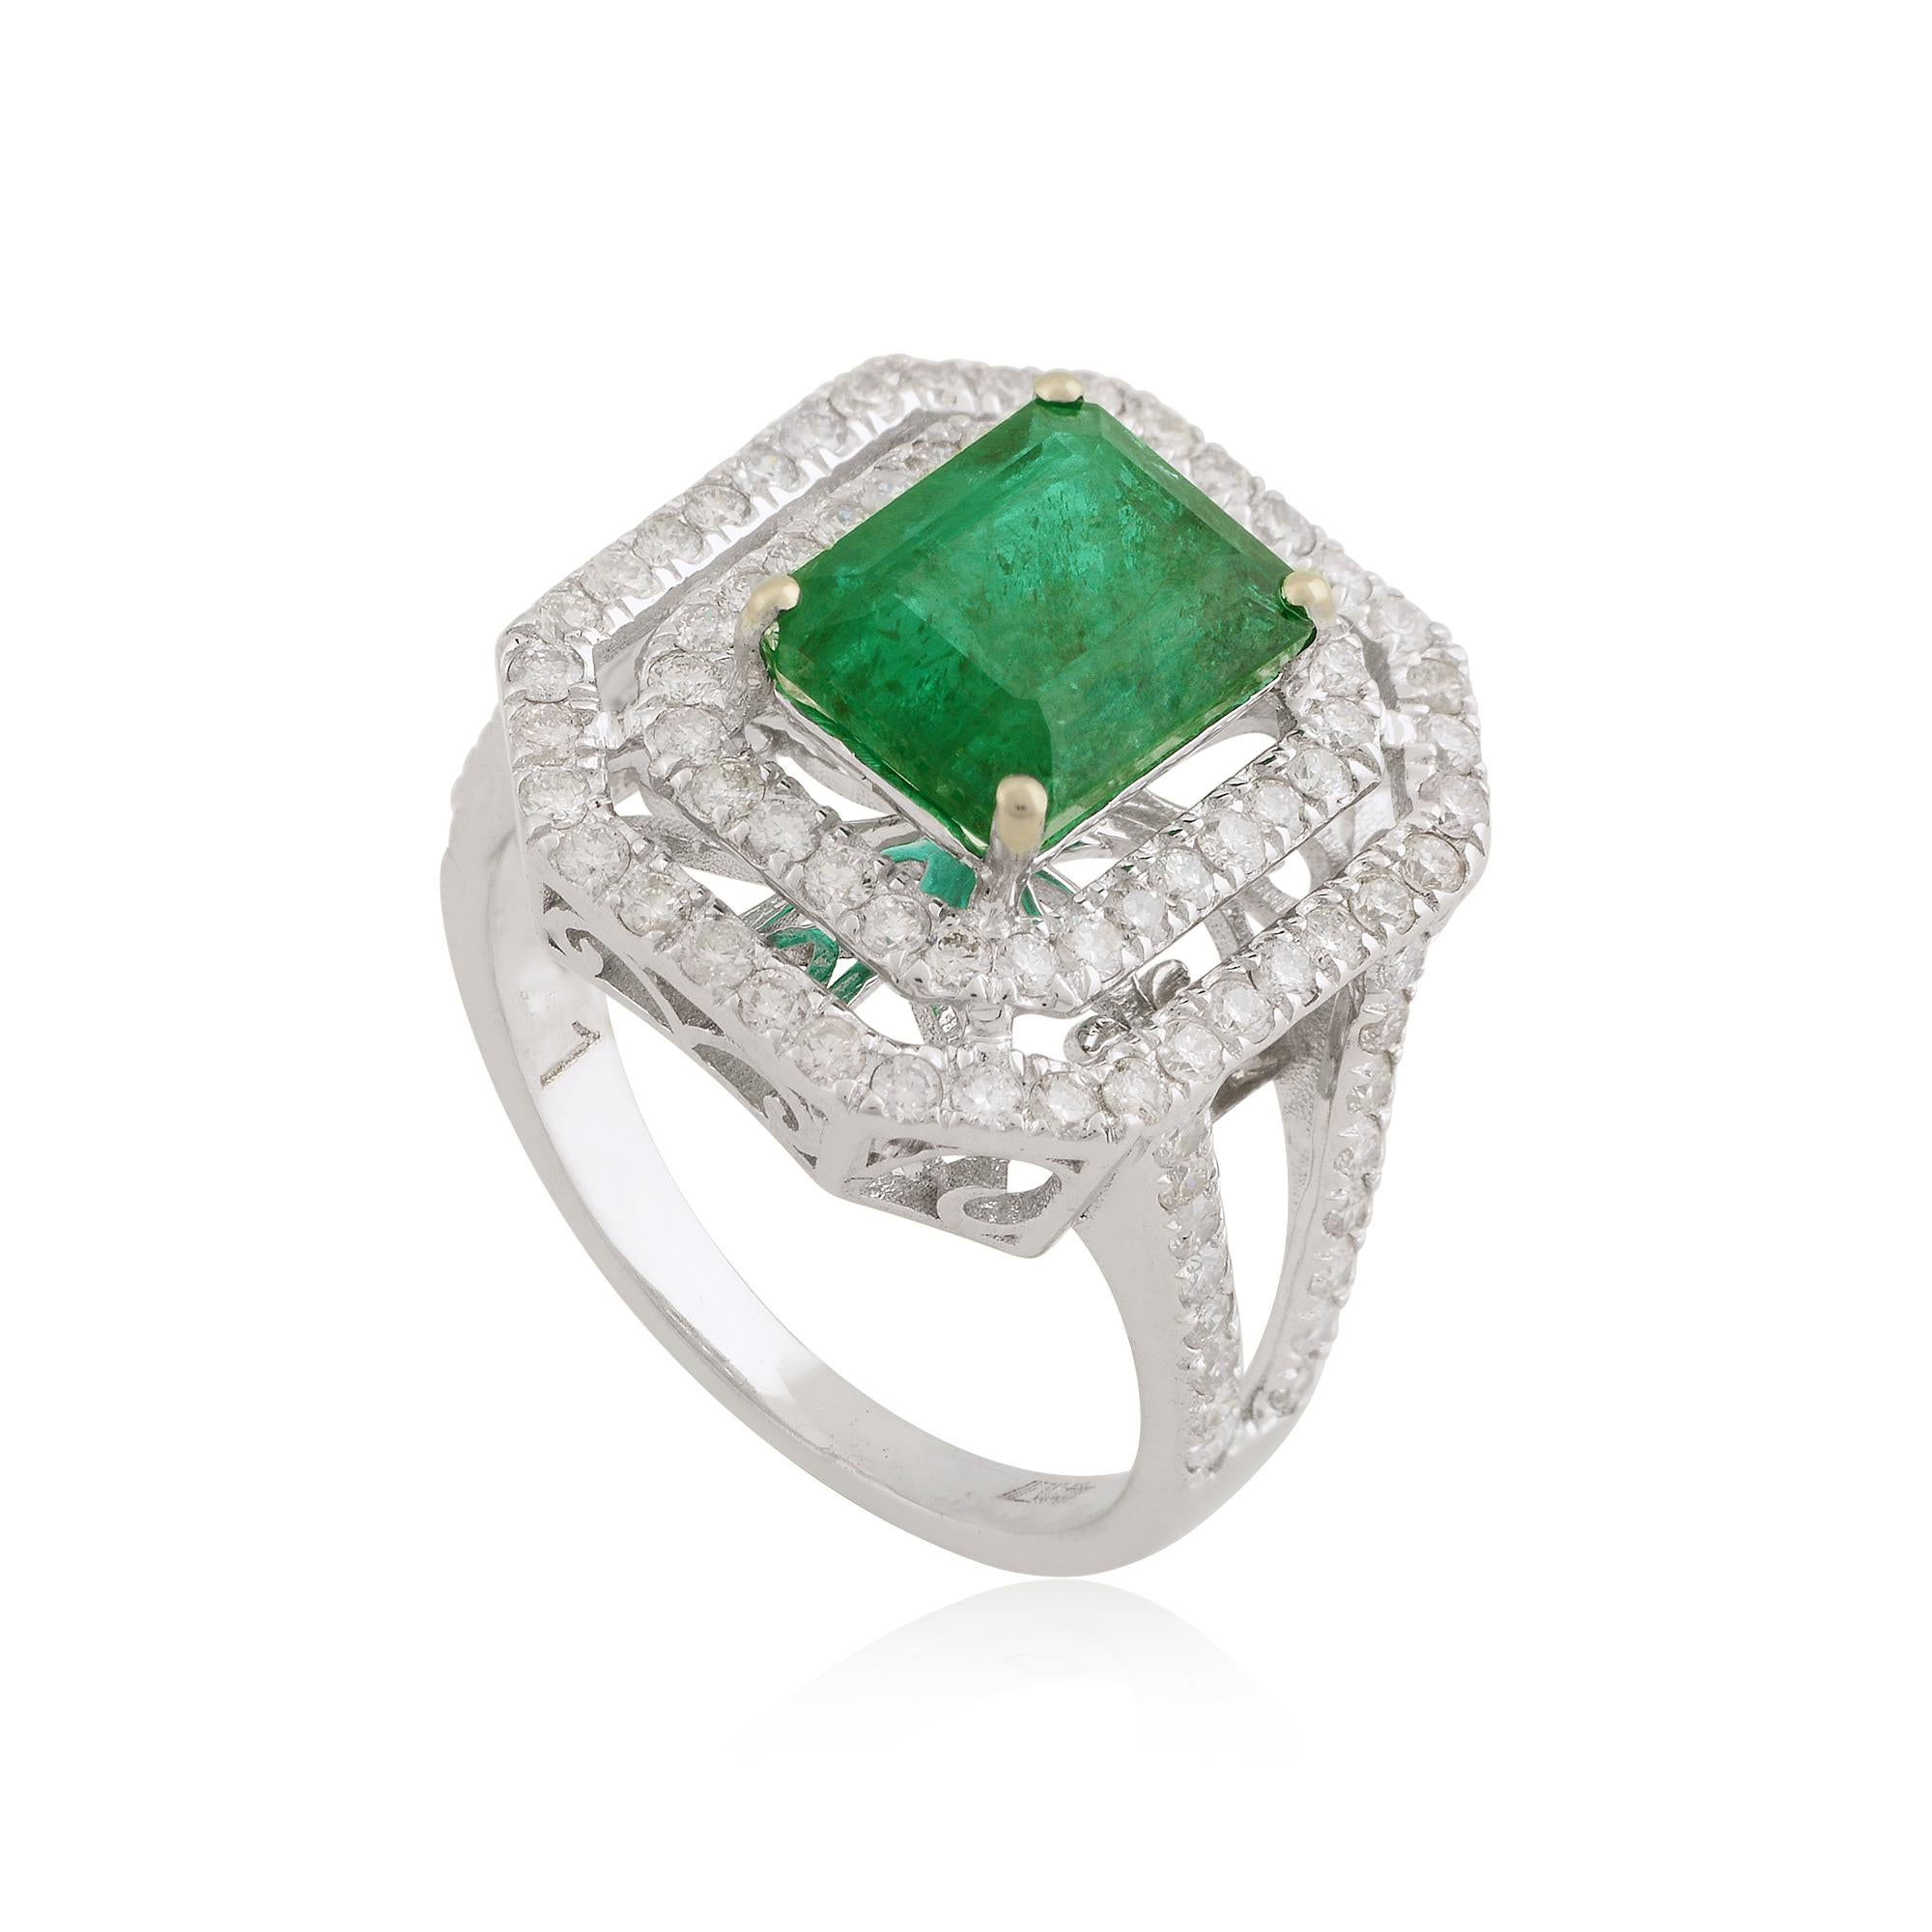 For Sale:  Natural Emerald Cocktail Ring Diamond Pave 10k White Gold Fine Handmade Jewelry 5